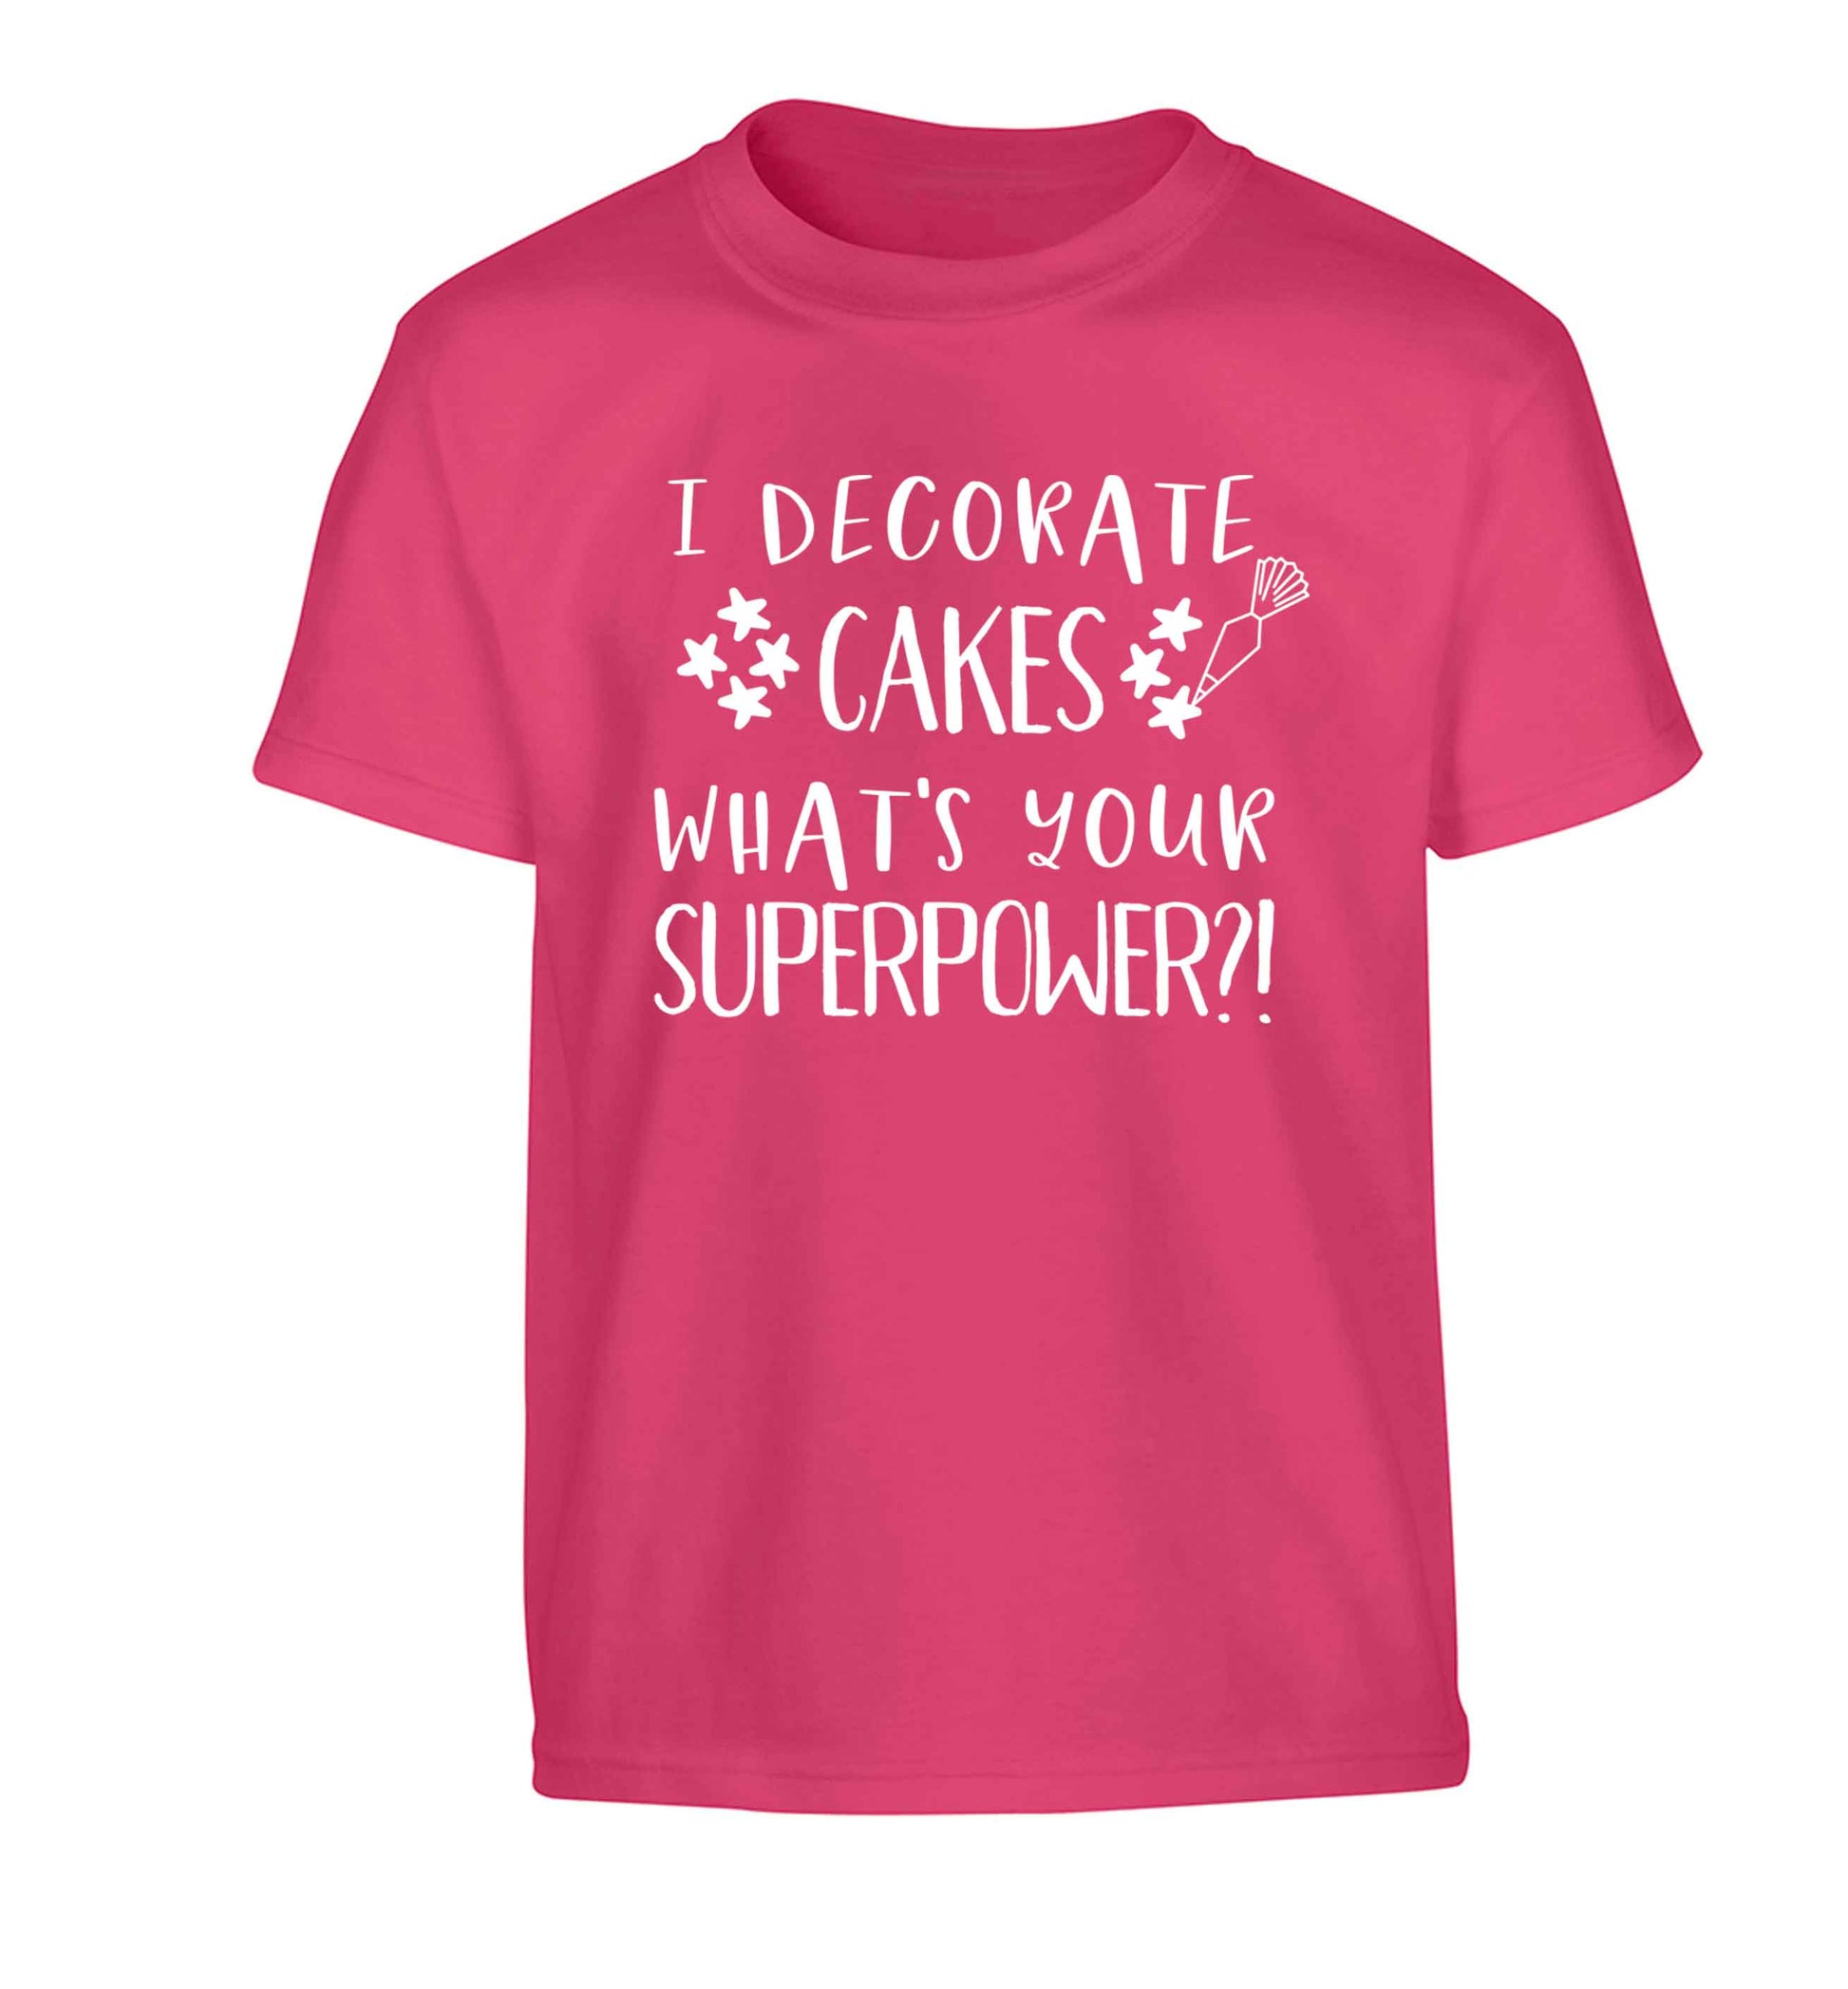 I decorate cakes what's your superpower?! Children's pink Tshirt 12-13 Years